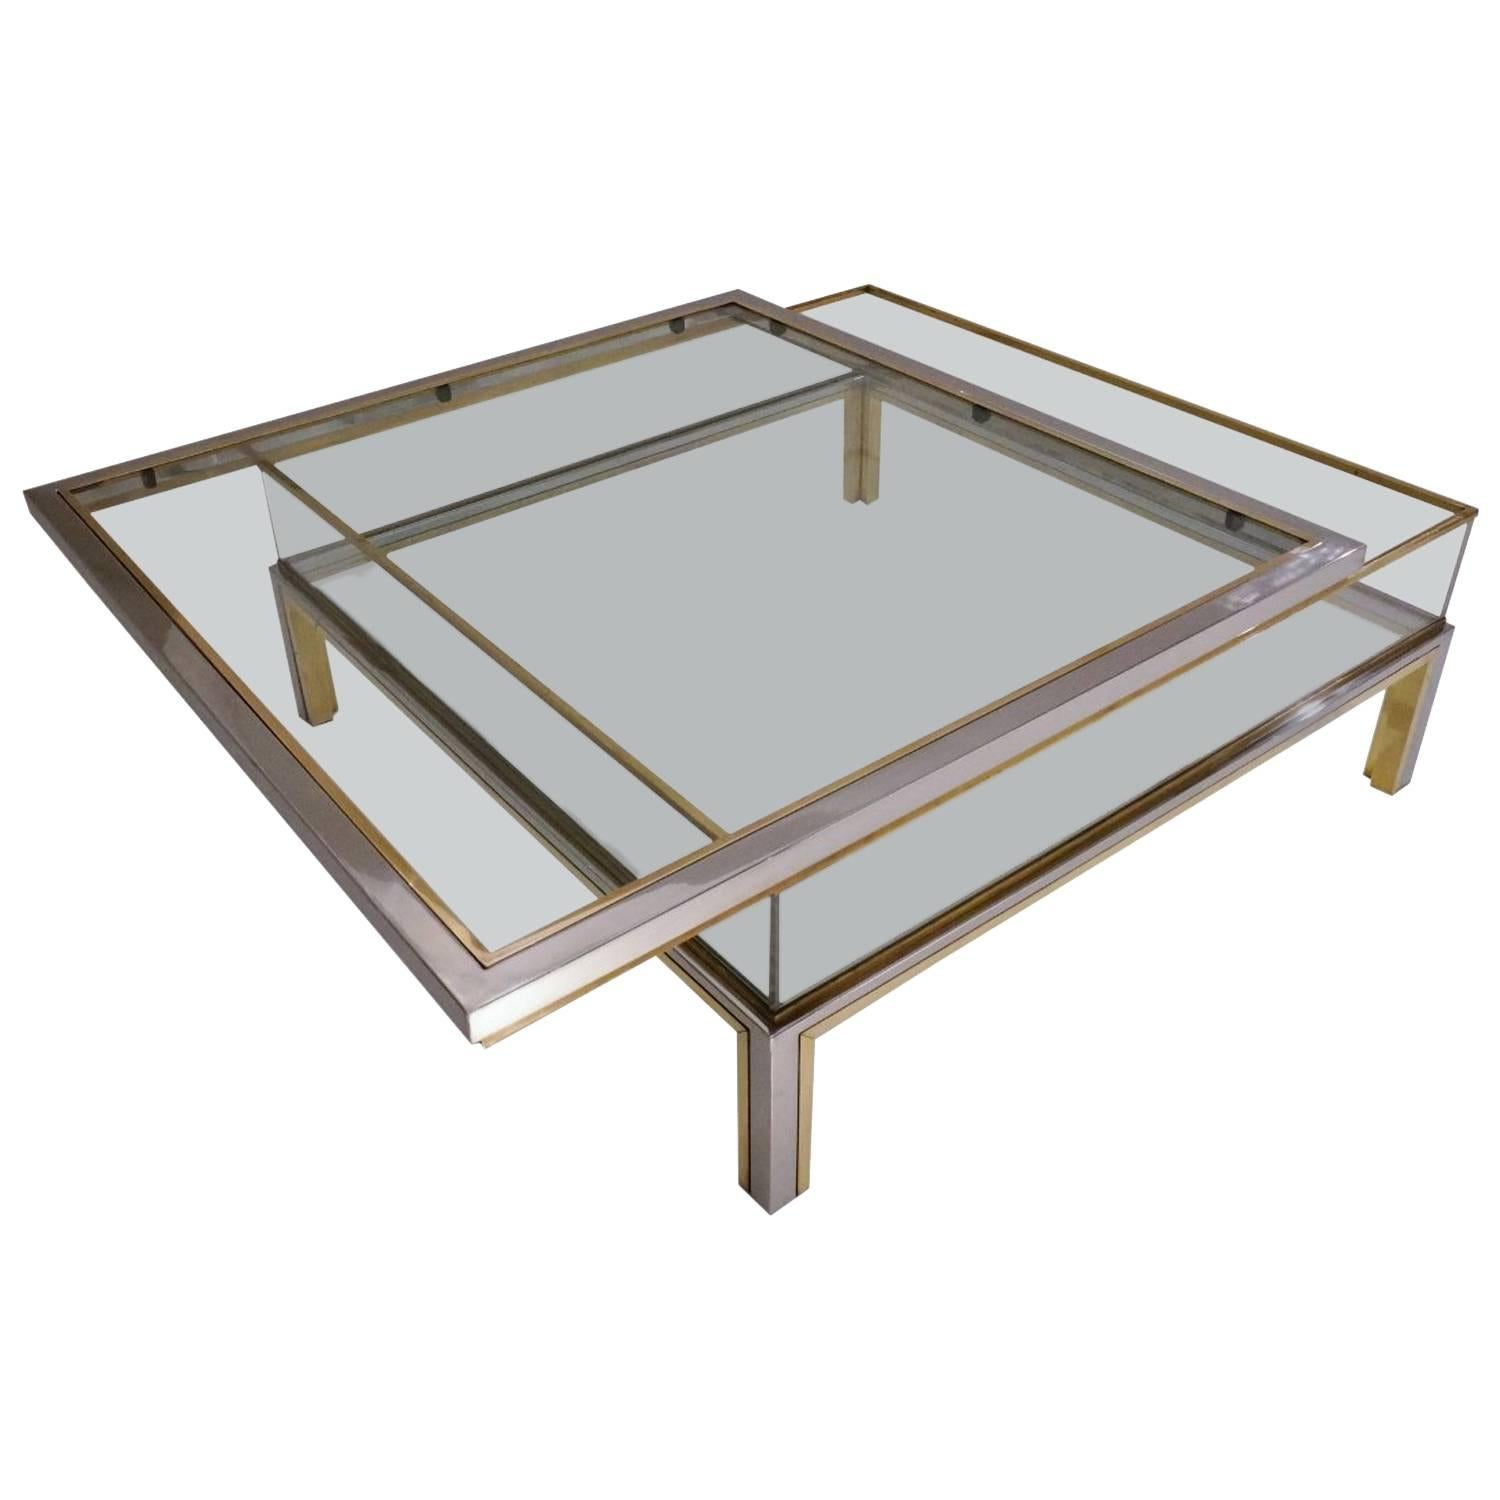 Romeo Rega Signed Coffee Table Sliding Top, Brass and Chrome, 1970s